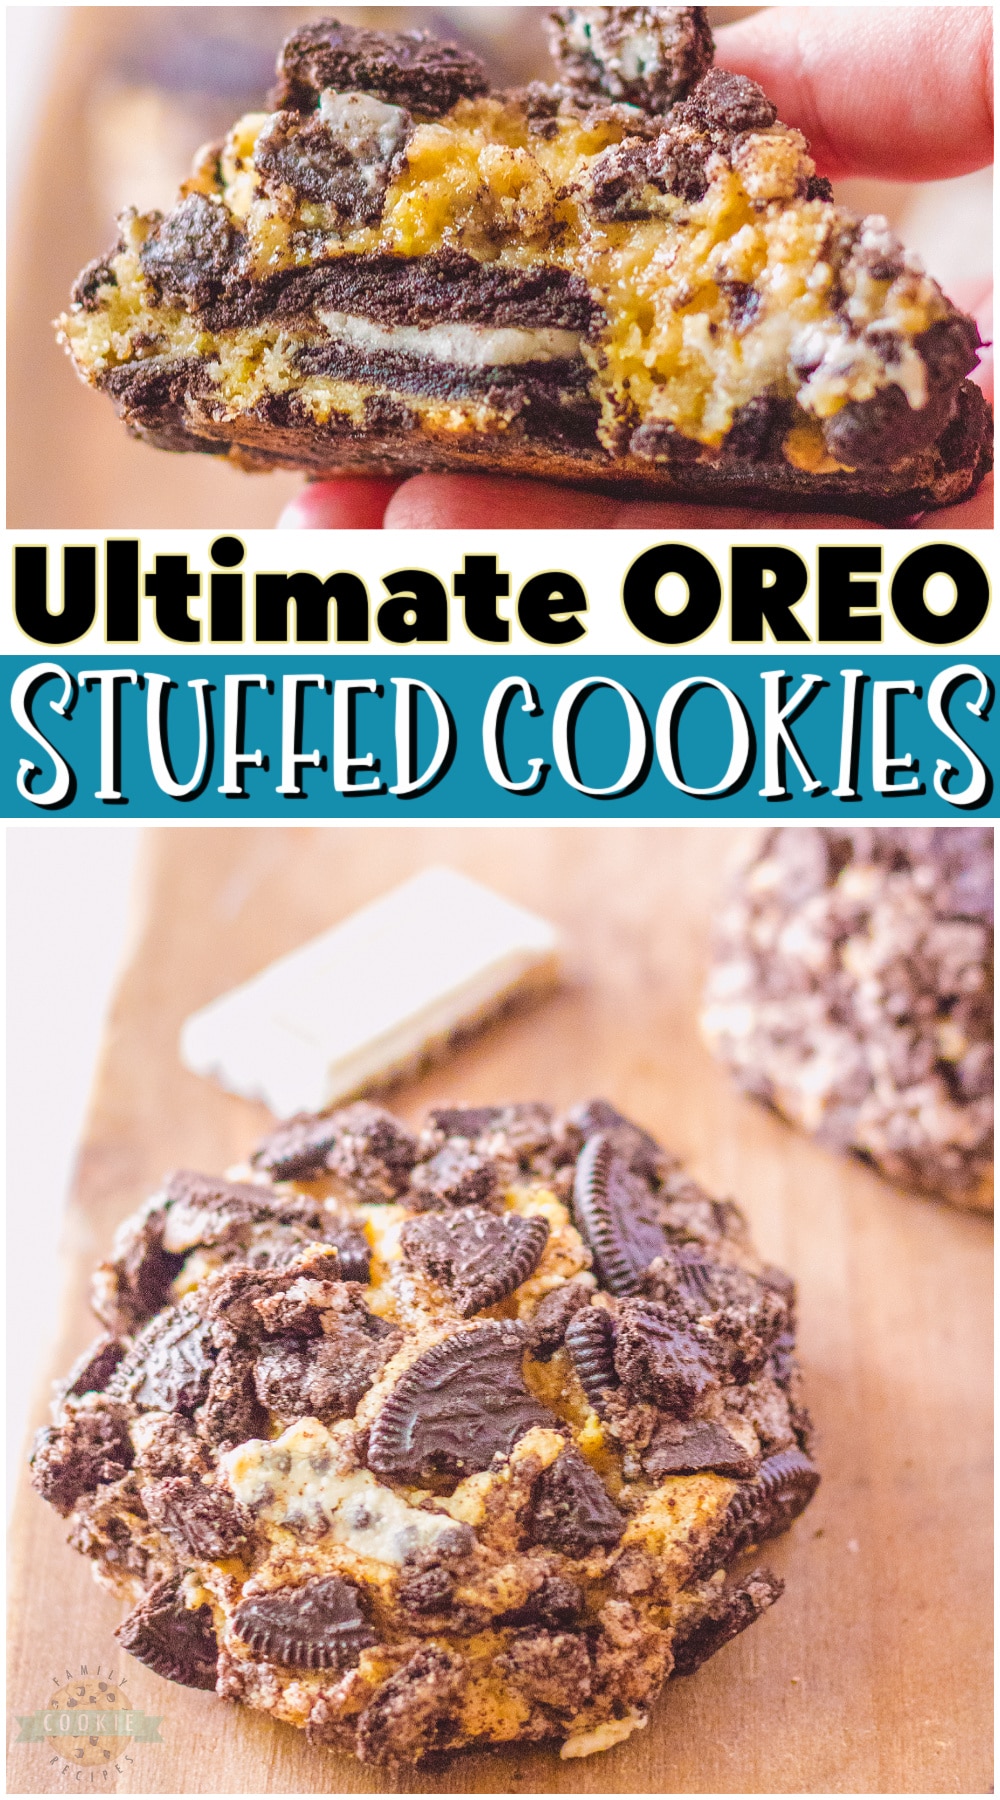 Oreo Stuffed Cookies loaded with sweet Cookies & Cream flavors! Vanilla cookies stuffed with an OREO, loaded with candy bar pieces, then rolled in more OREO's. These are the ULTIMATE Cookies and Cream Cookies! via @buttergirls